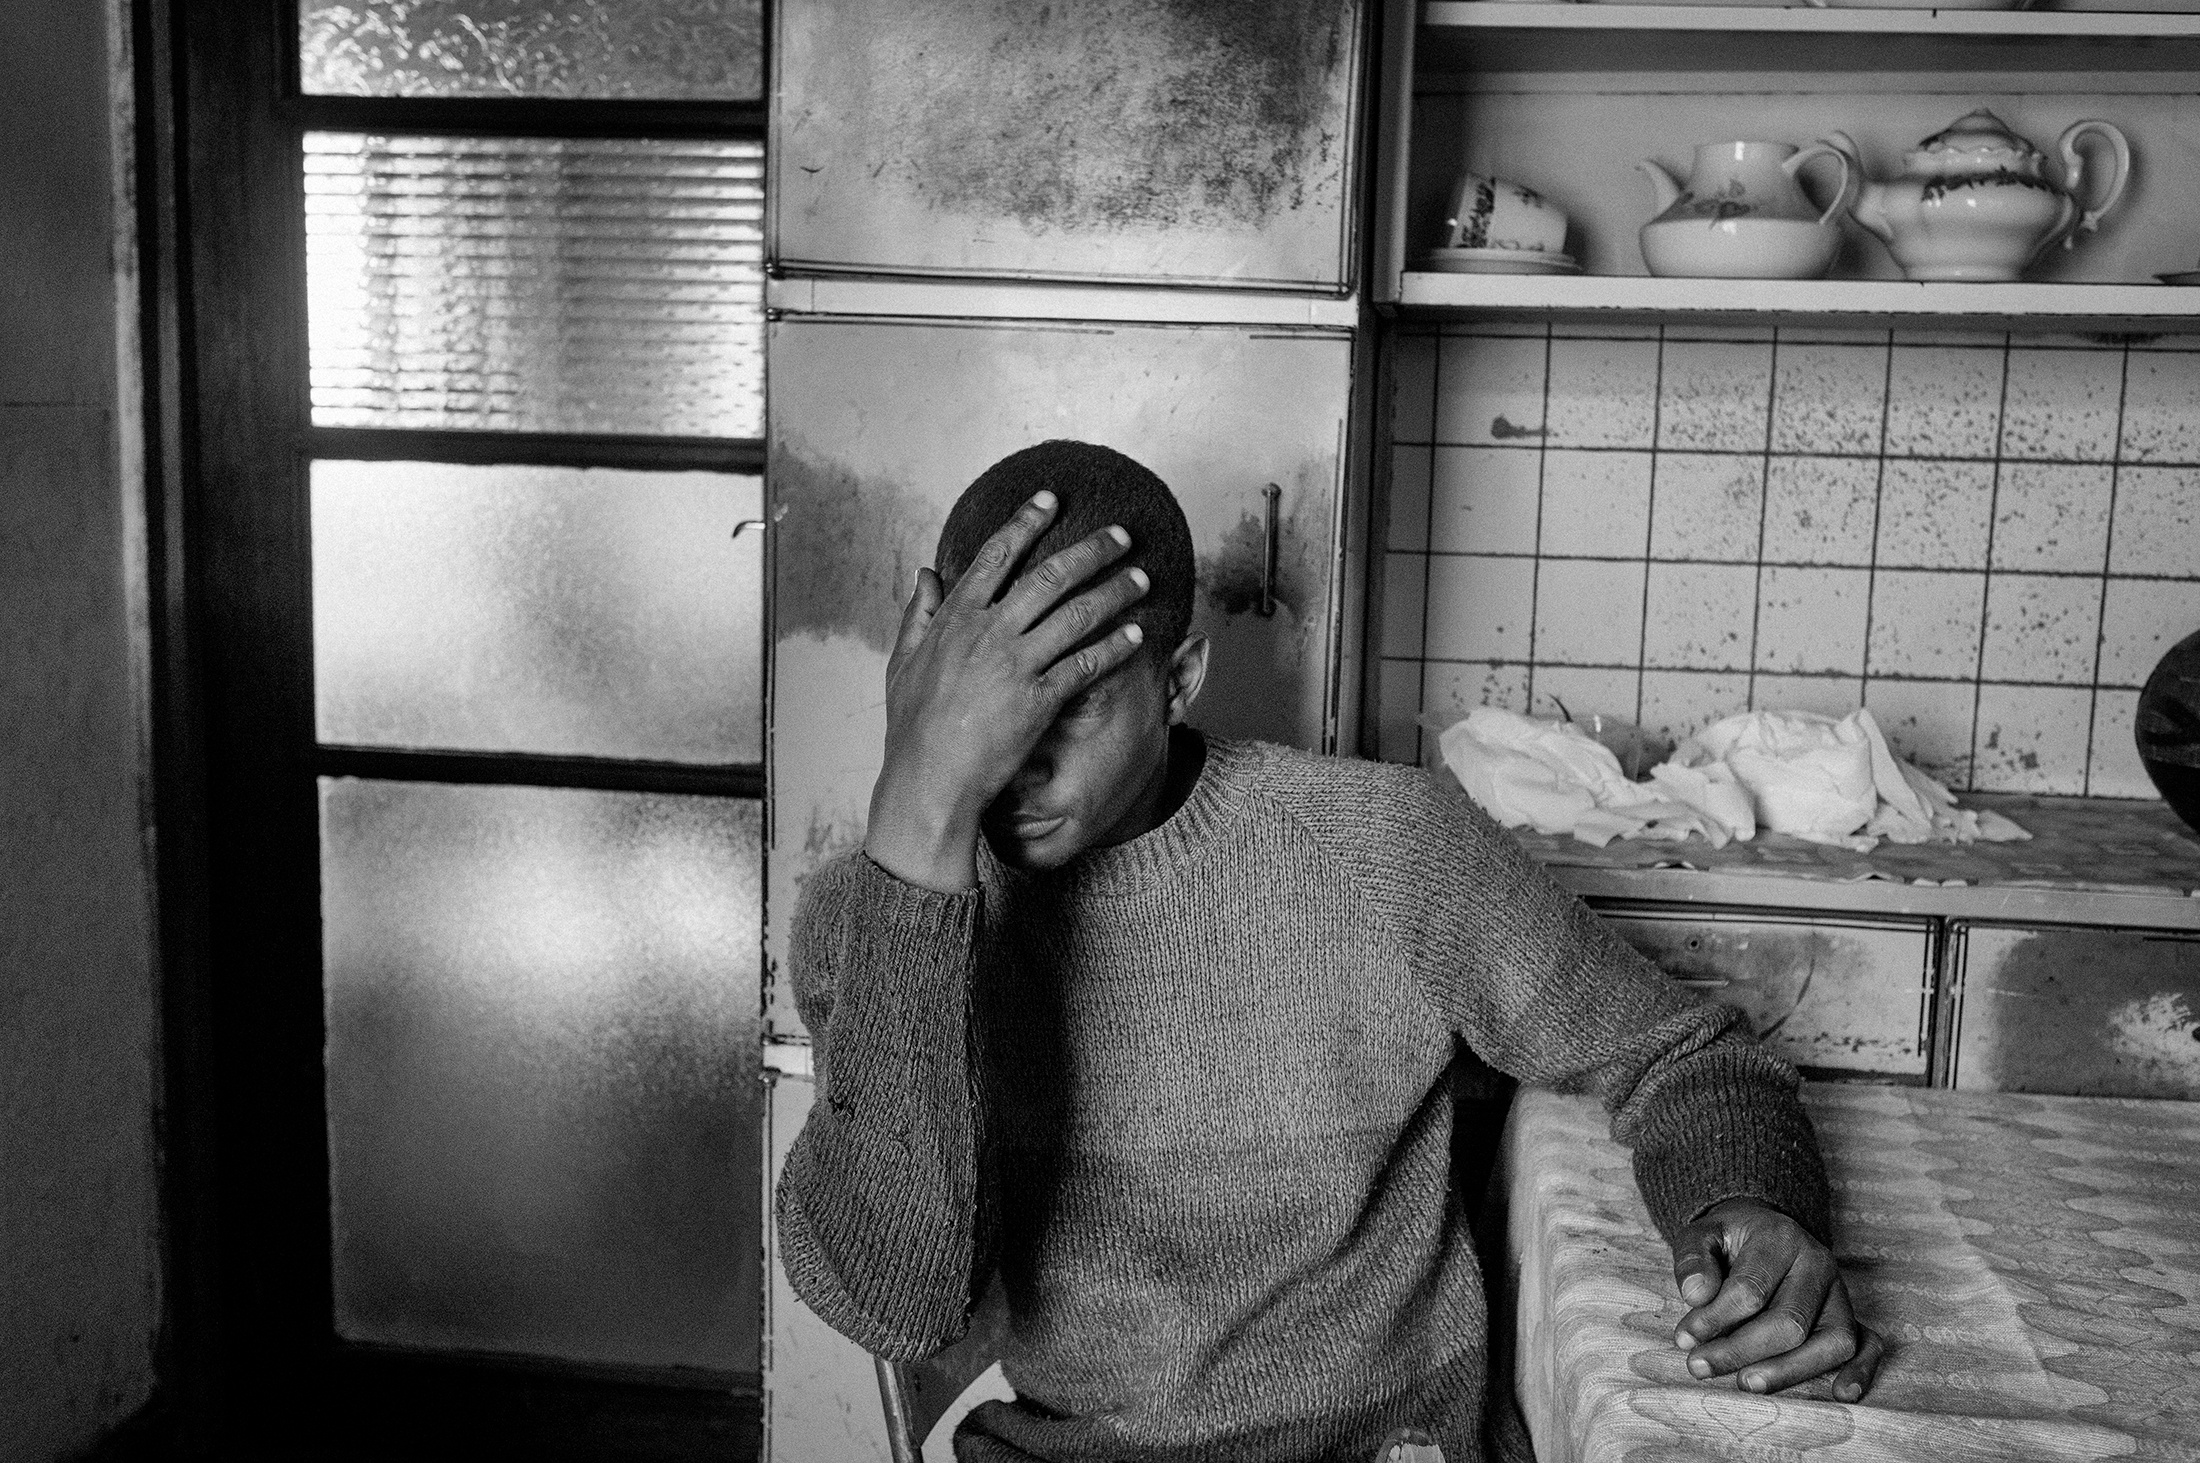 Lindokuhle Sobekwa's monochrome photograph 'Mzwandile at home after coming from the rehab centre' shows an individual sitting at a kitchen table with their their hand on their head.
